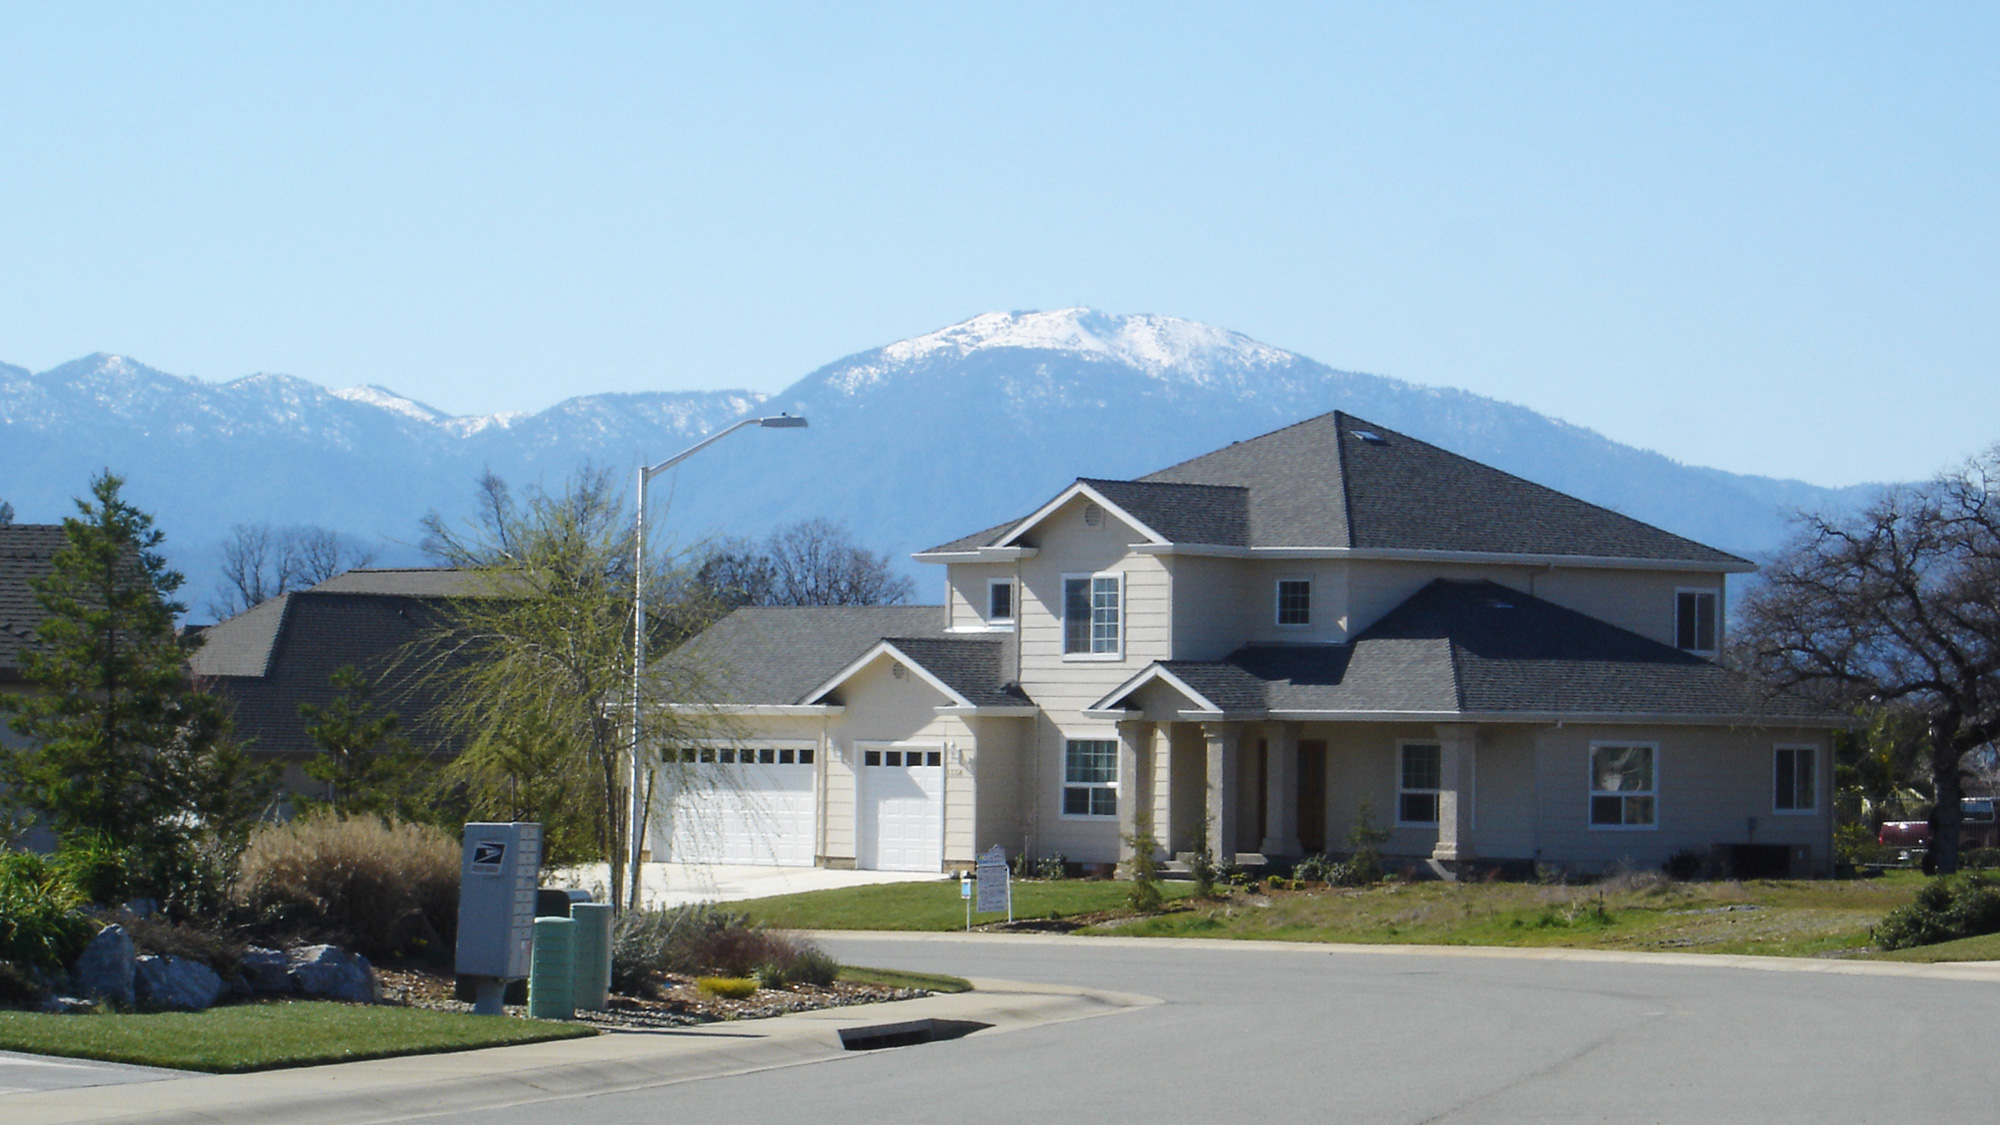 Gold Hills, Redding CA - Neighborhood Home and Mt Bally in the distance